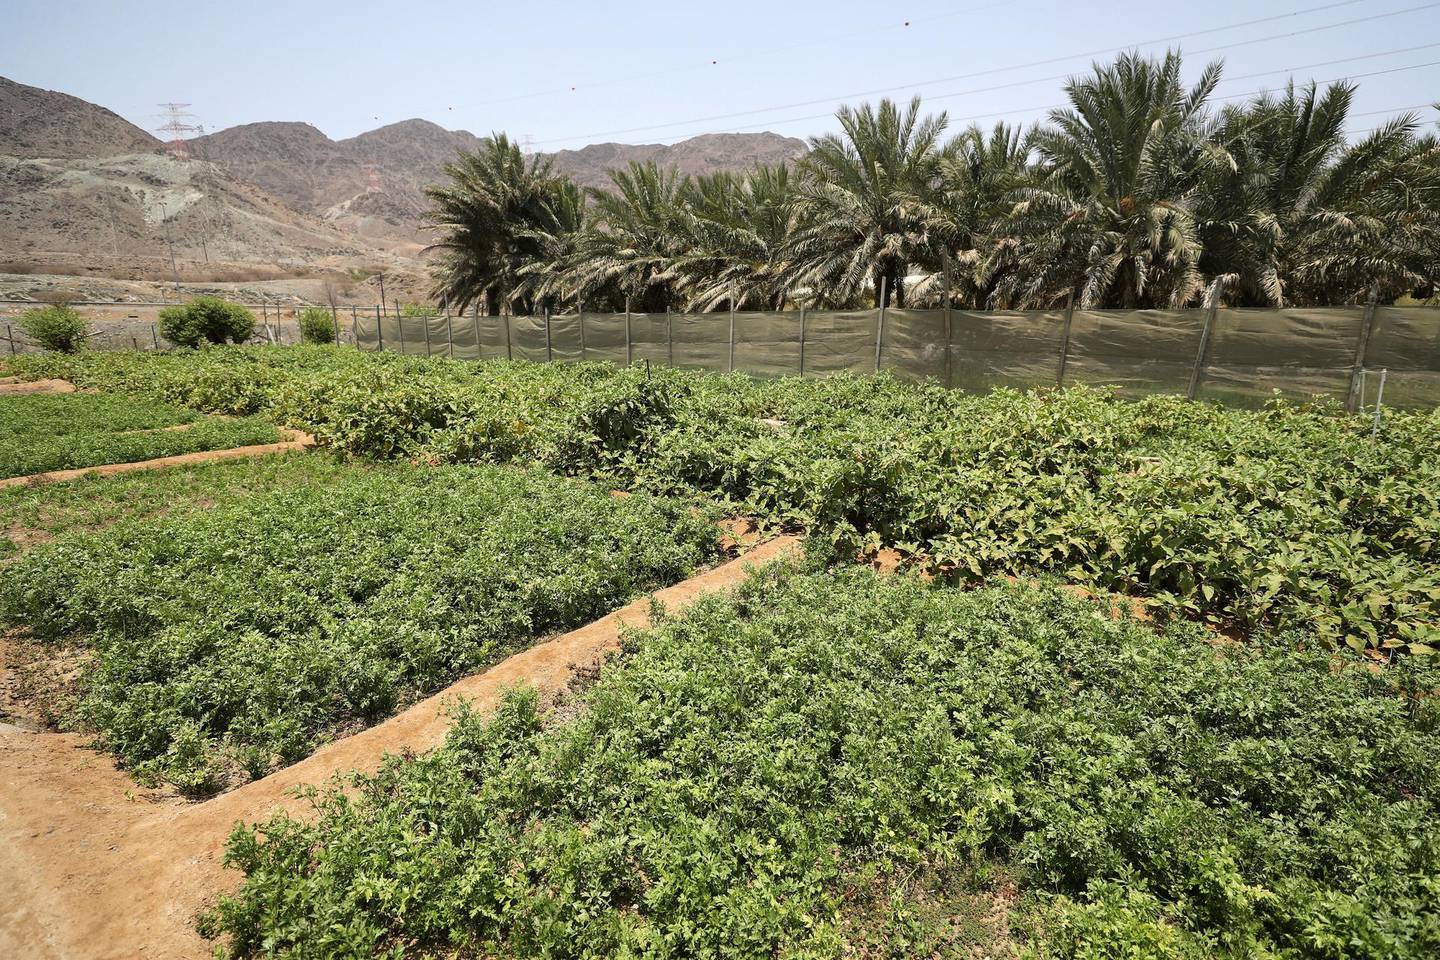 Fujairah, United Arab Emirates - June 23rd, 2018: Rashid Obaid, an Emirati farm owner. Low revenue and high costs due to lack of water prevent many farmers from growing fruits and vegetables. Saturday, June 23rd, 2018 in Al Bithnah, Fujairah. Chris Whiteoak / The National